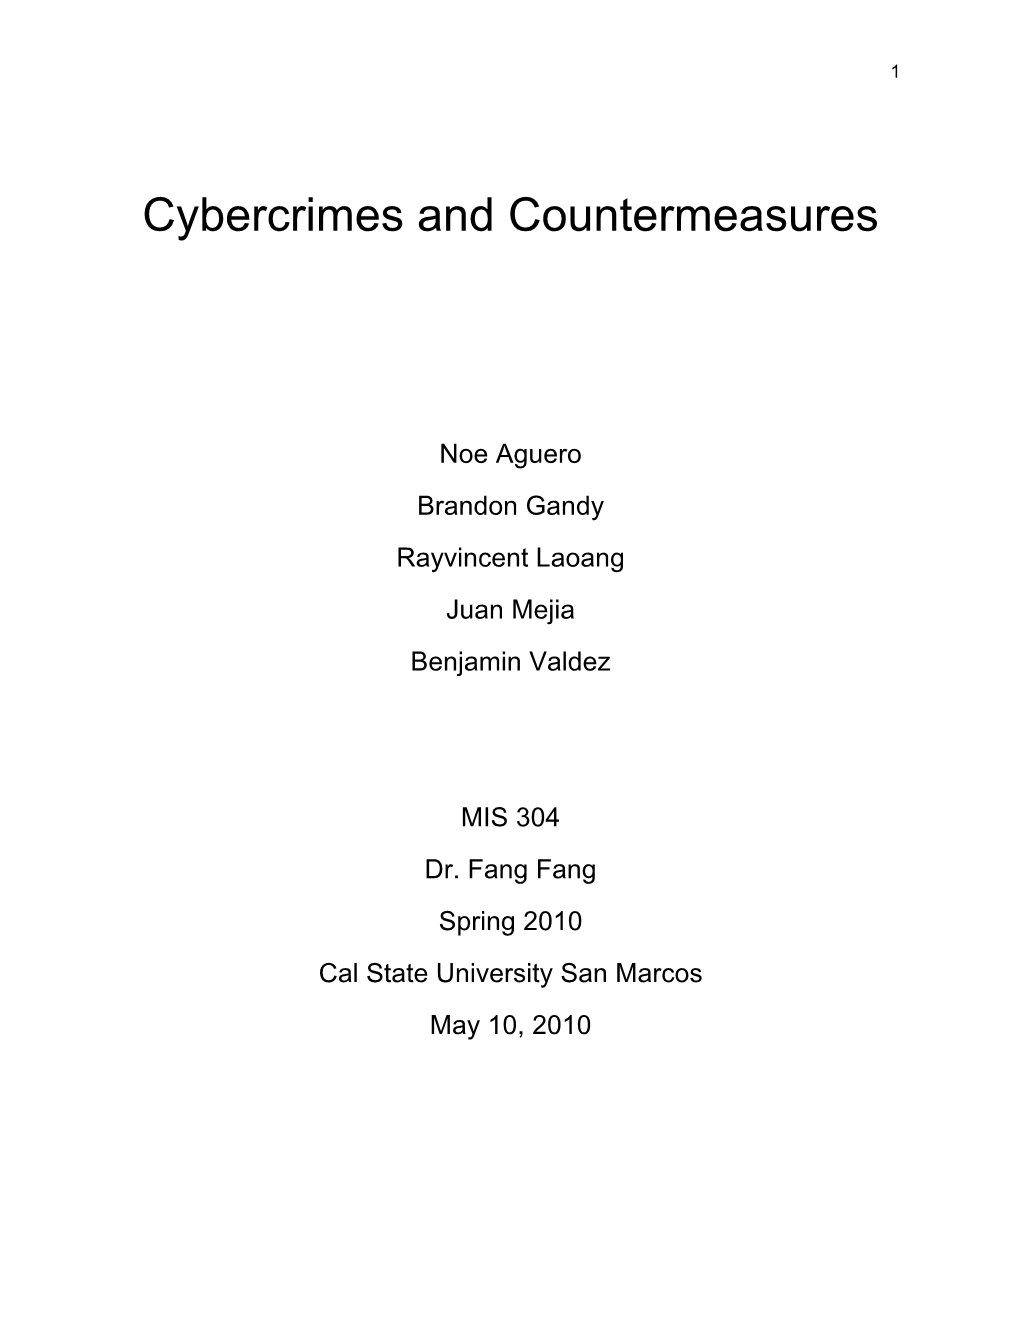 Cybercrimes and Countermeasures